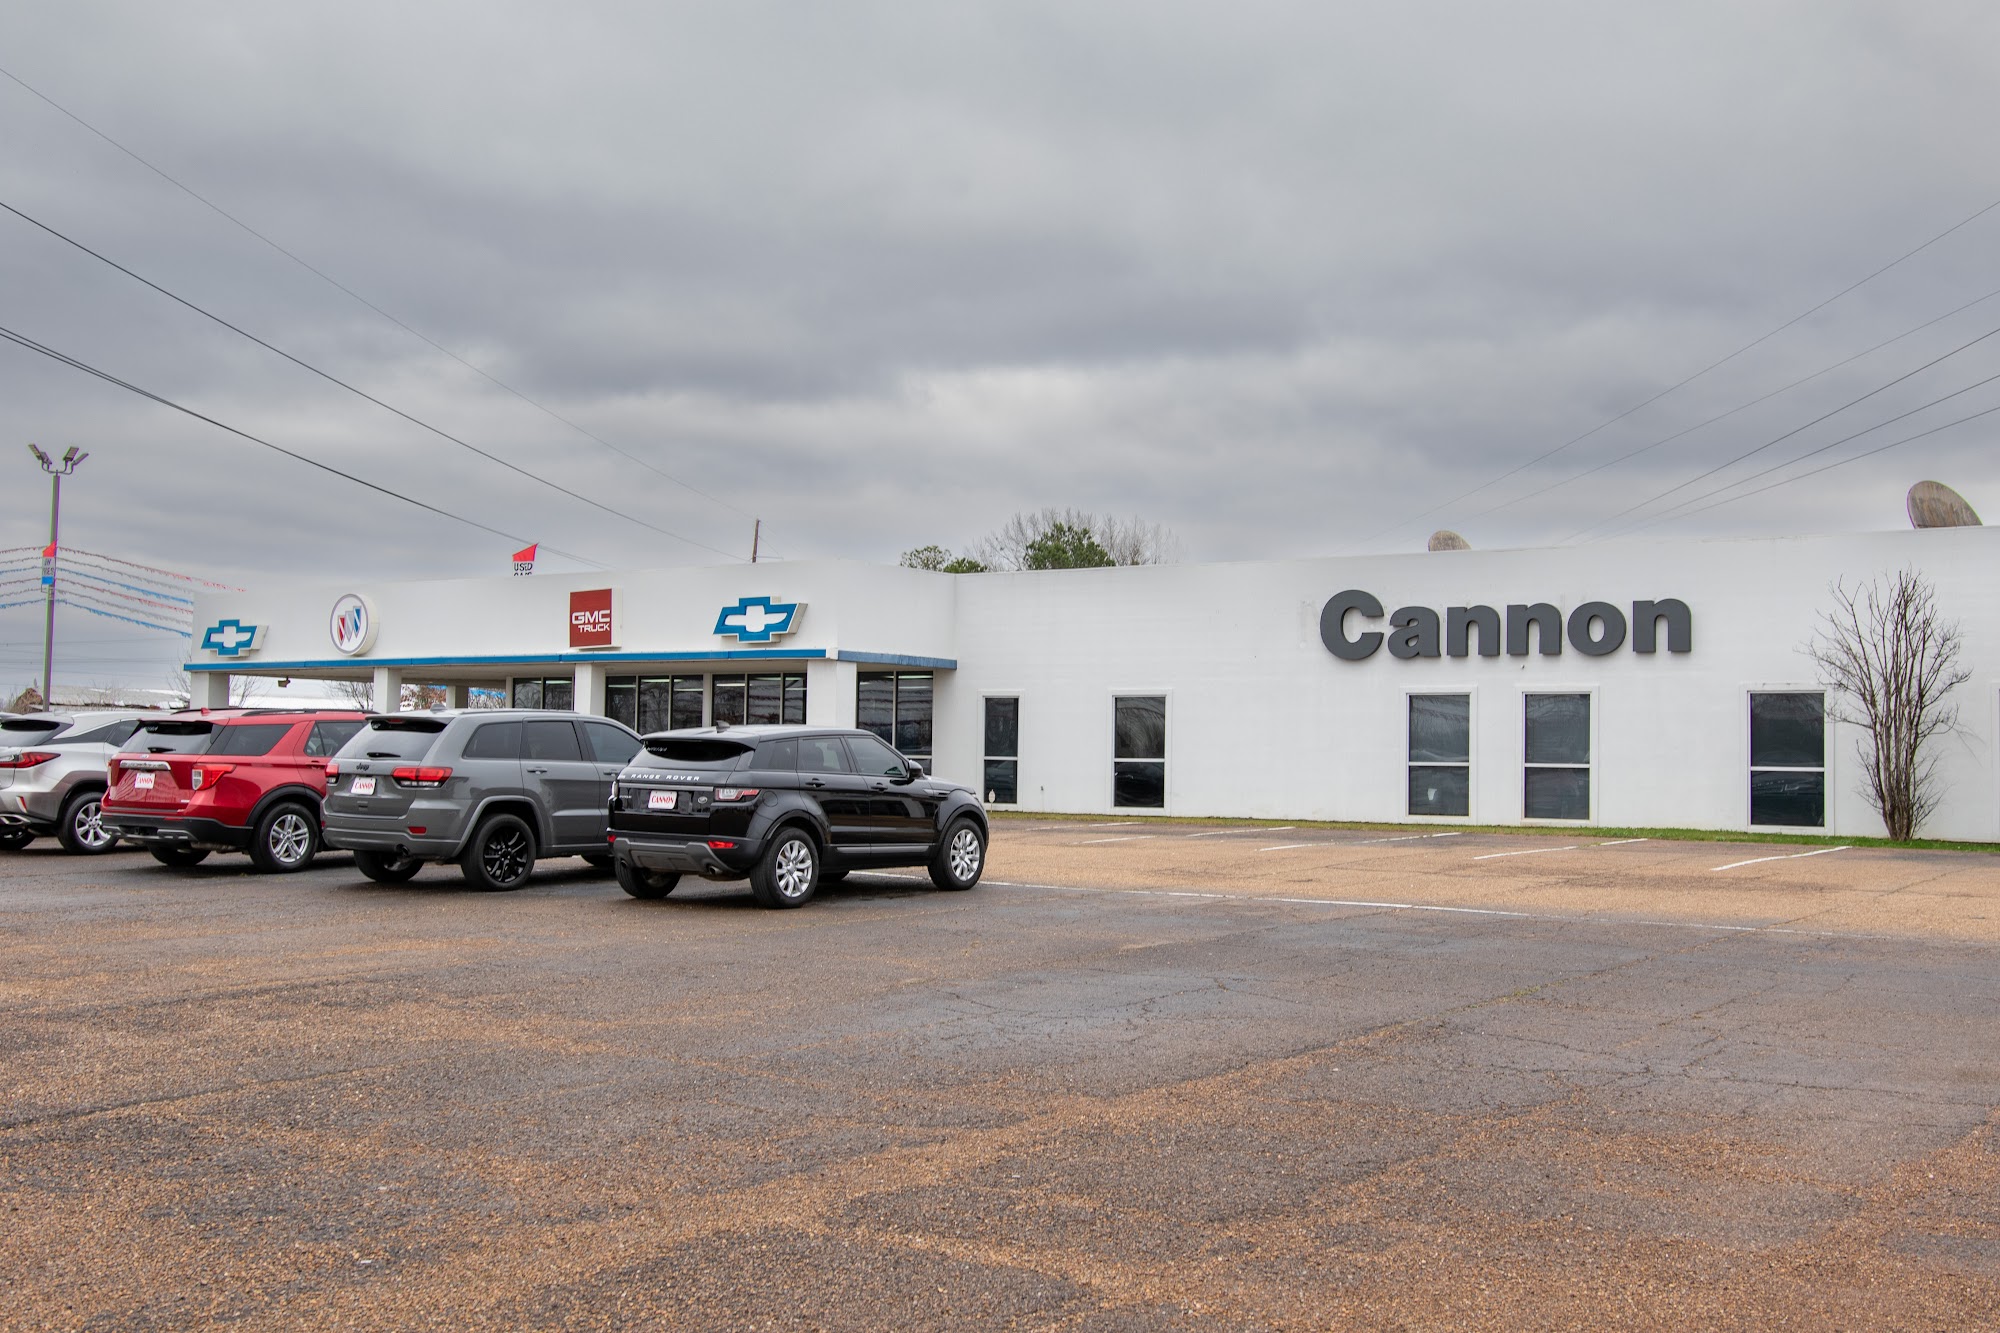 CANNON - CHEVROLET 8600 US-45 ALT North, West Point Mississippi 39773